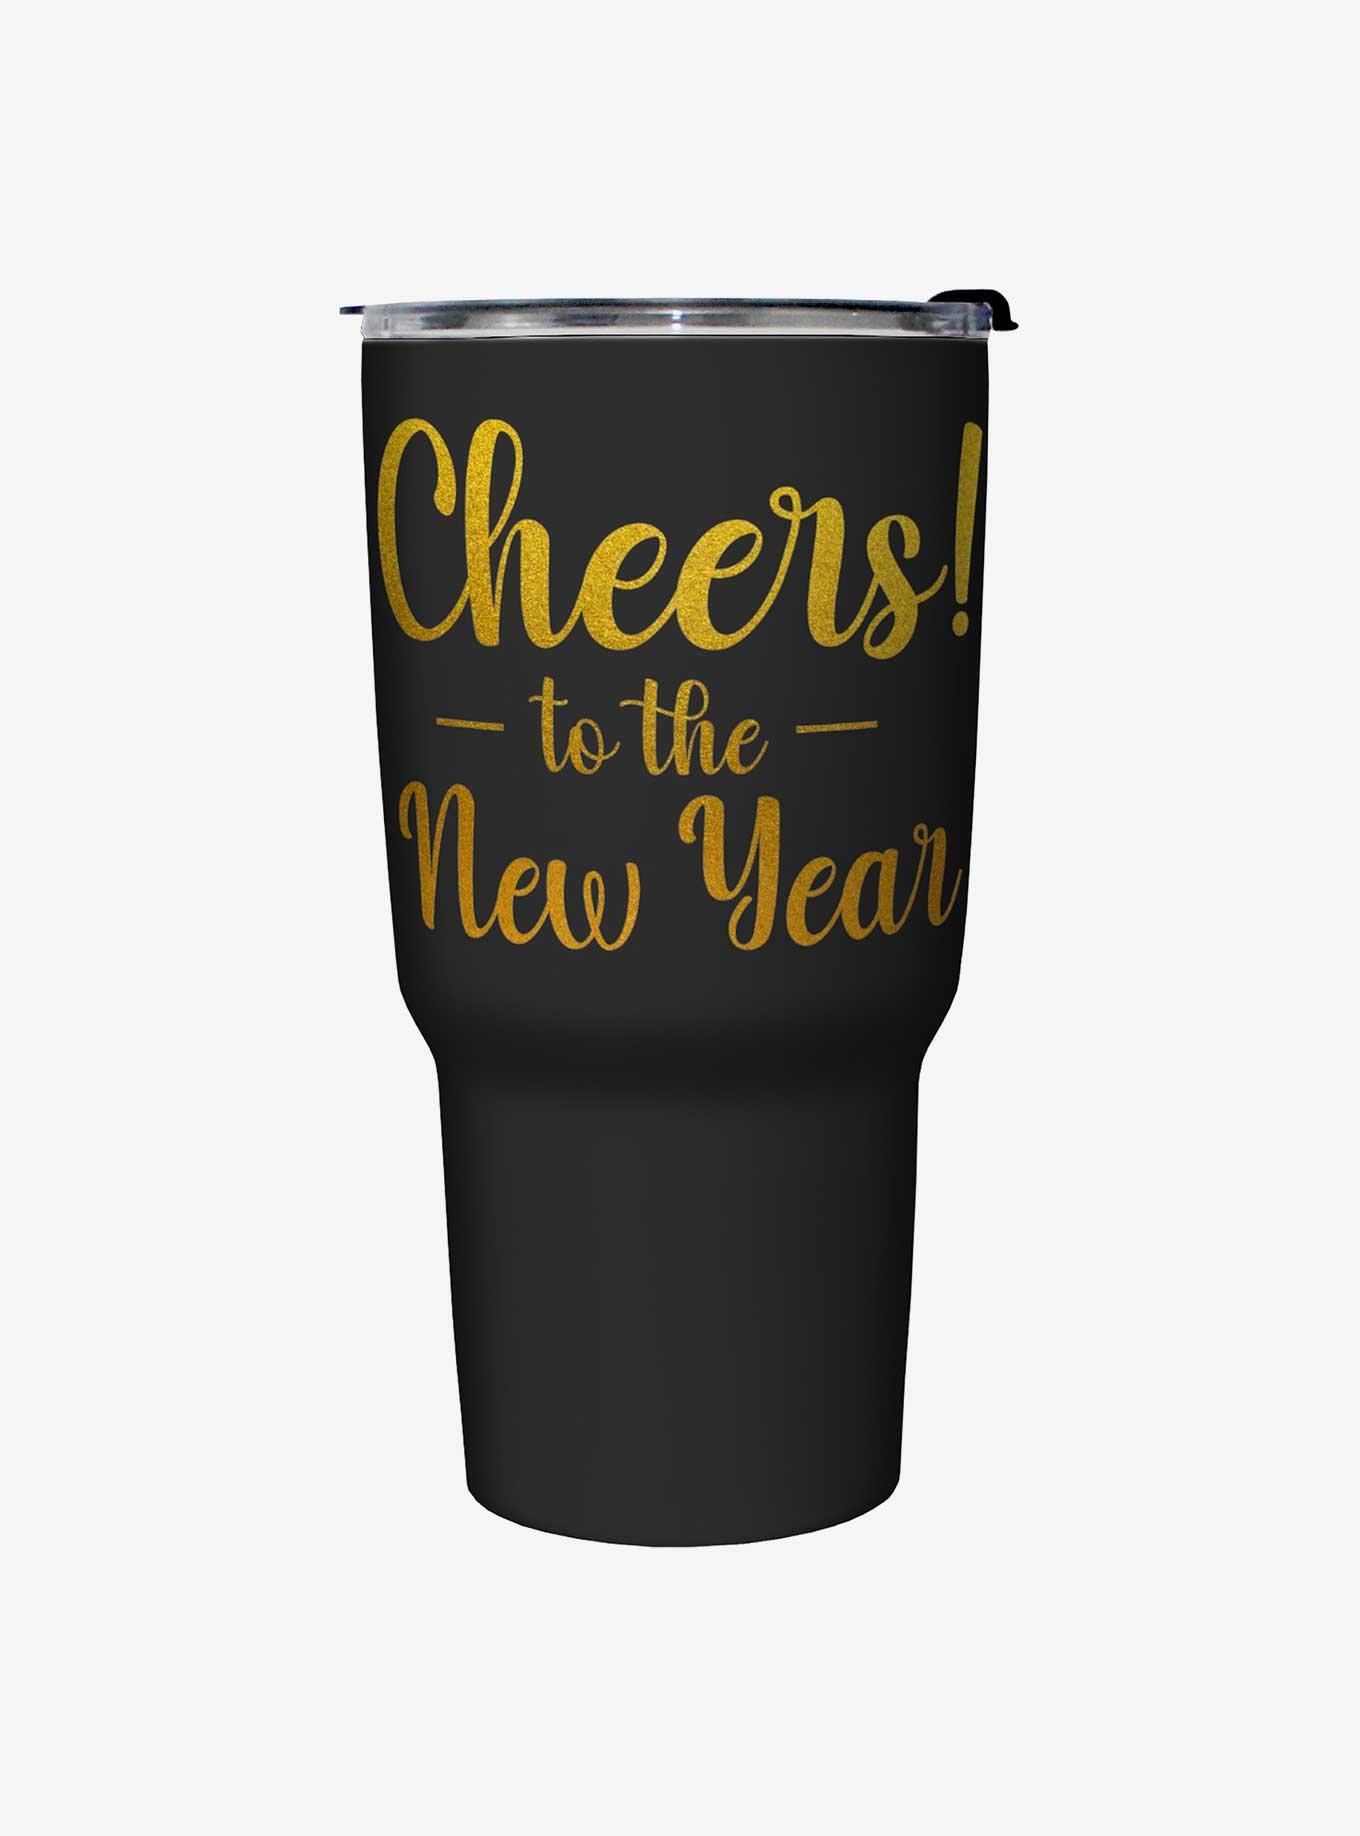 Hot Topic Cheers! To A New Year Travel Mug 